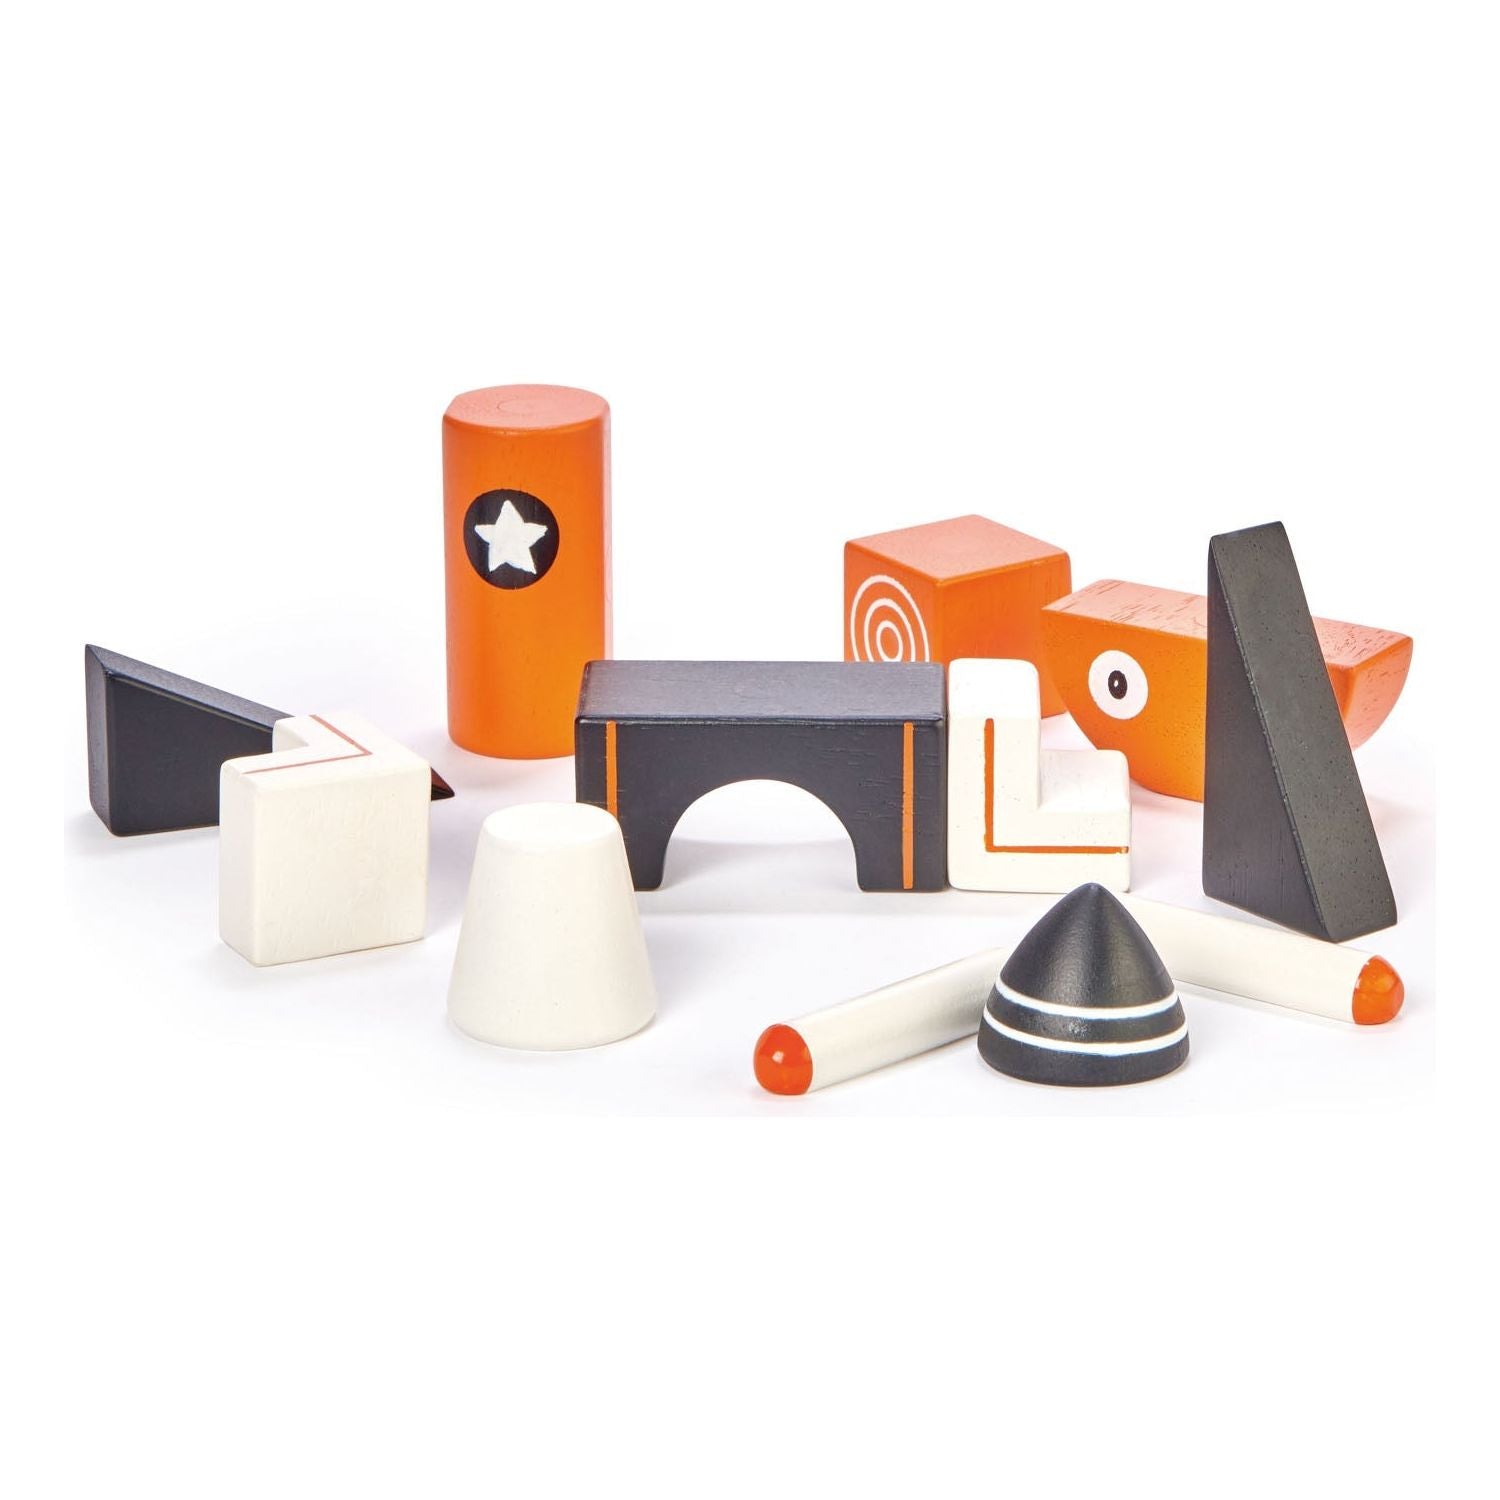 Galaxy Magblocs - The Online Toy Shop - Magnetic Toys - 2